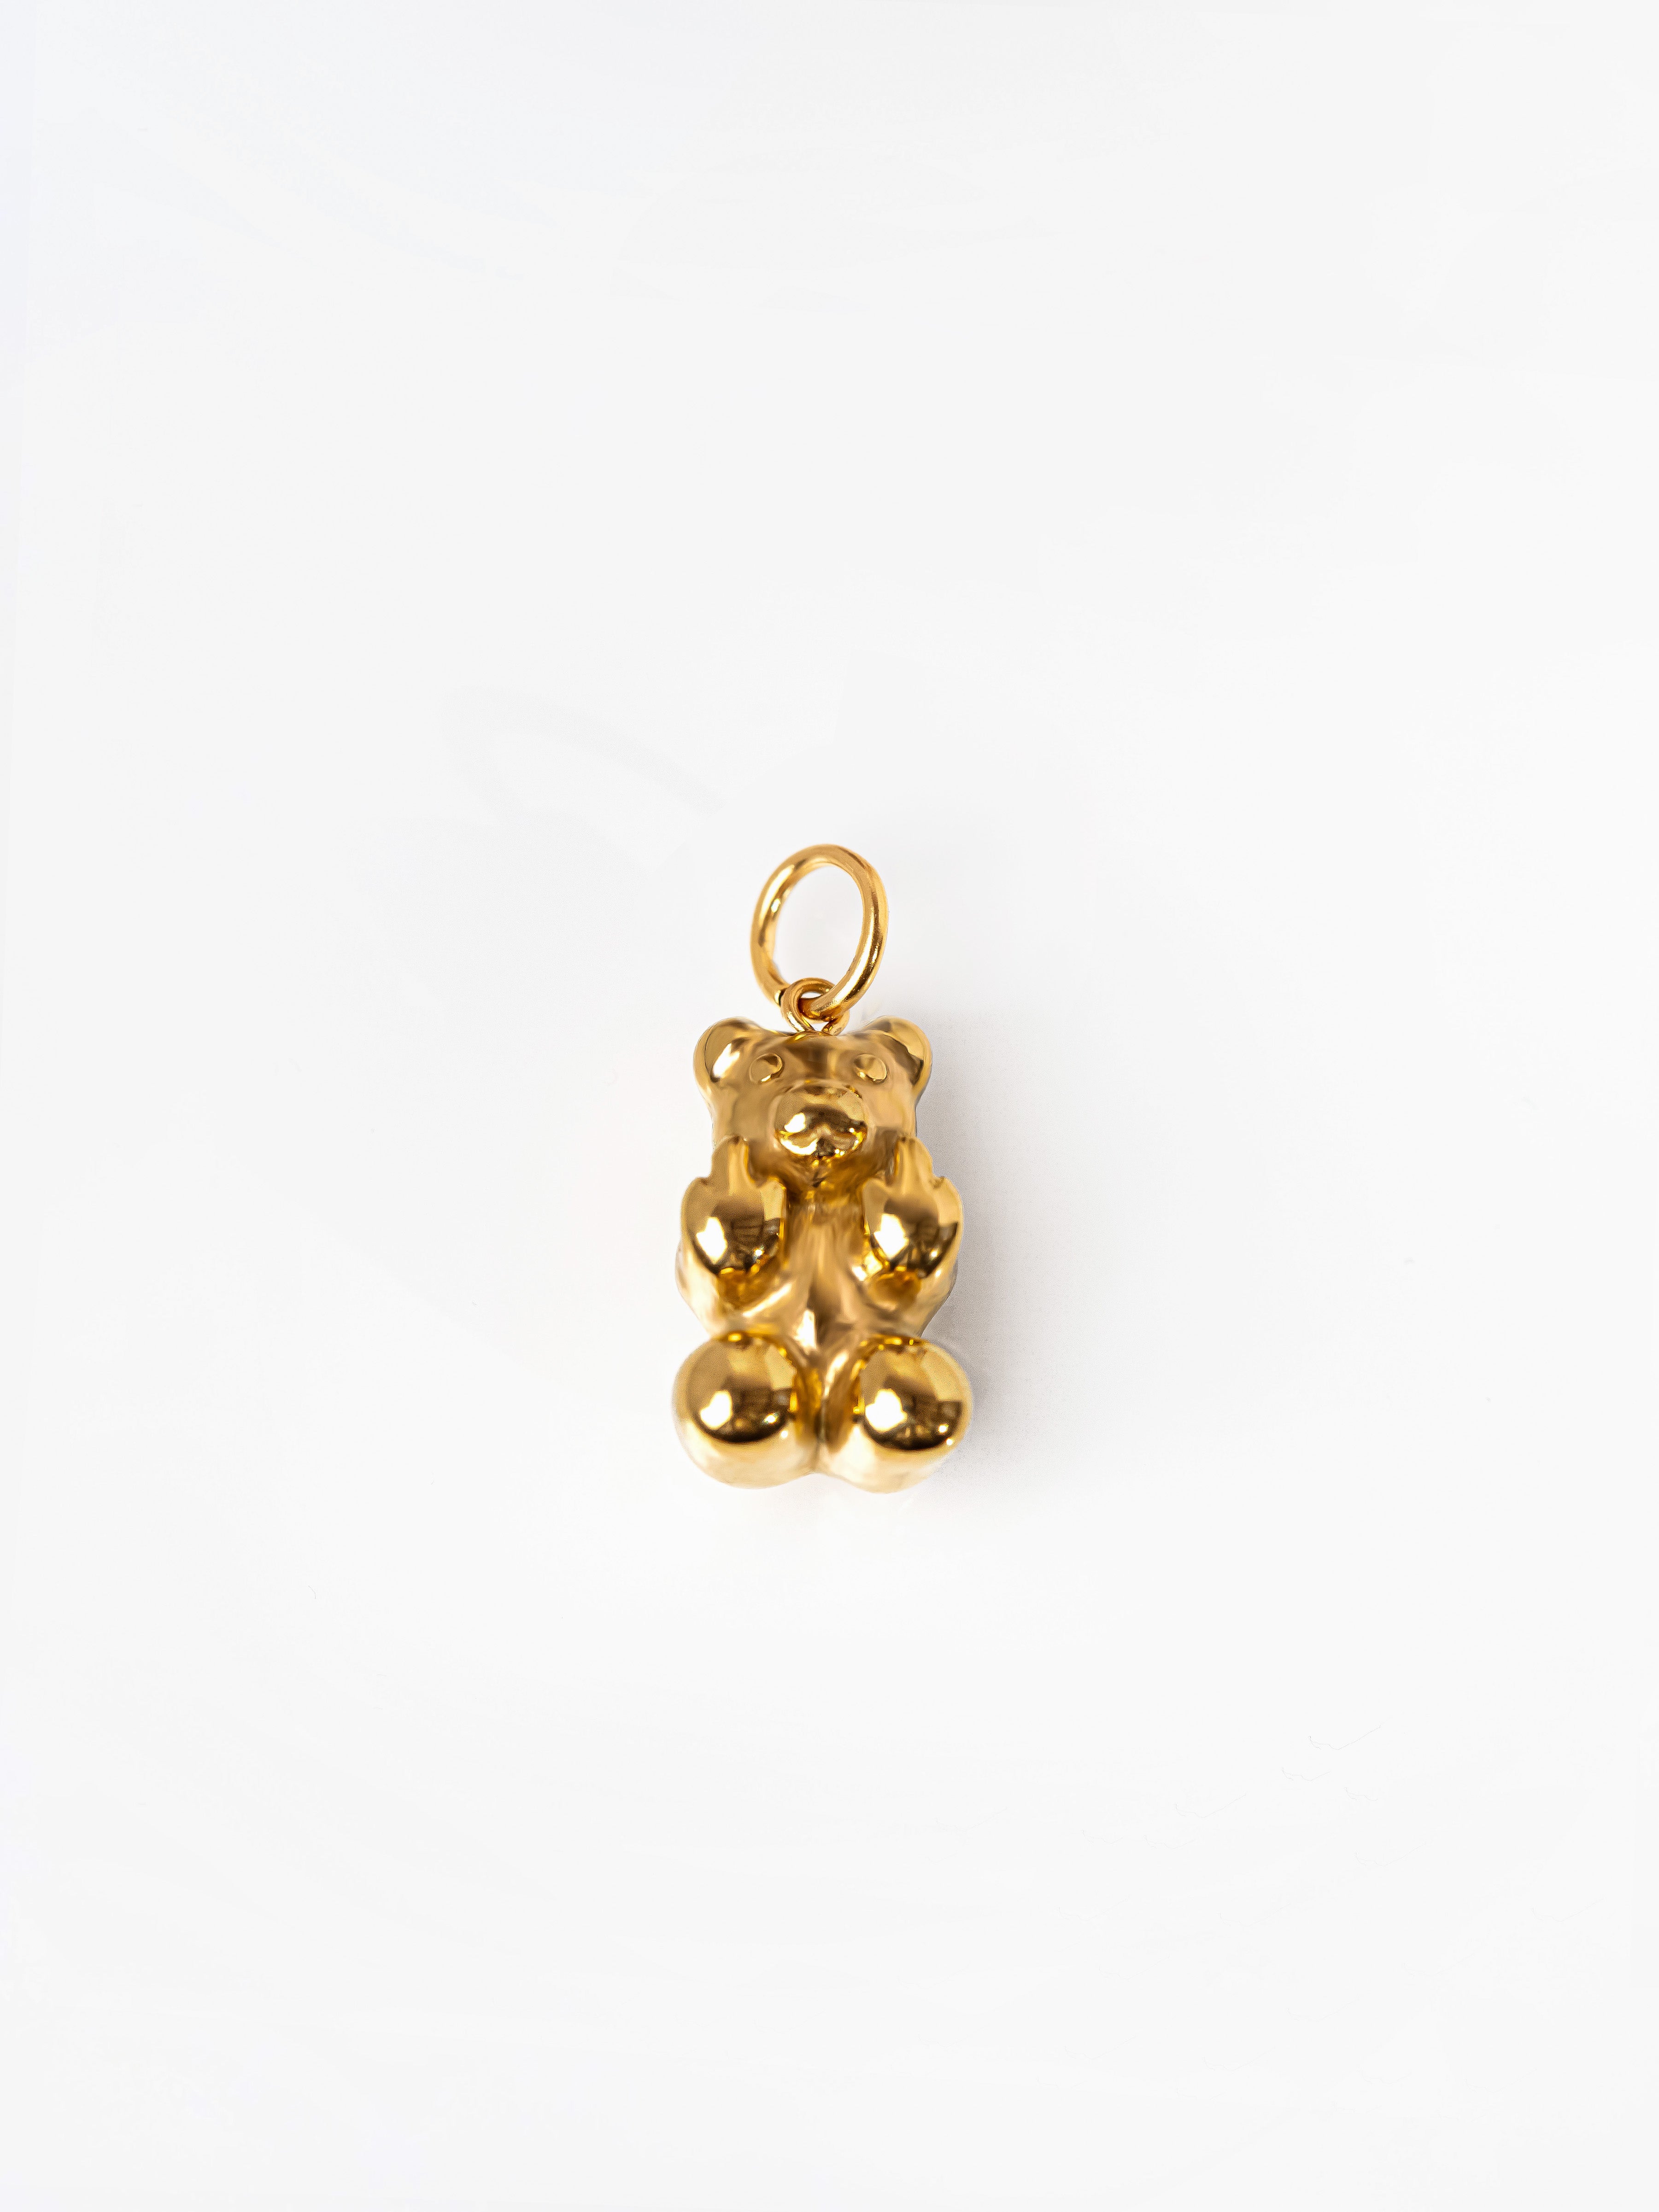 Gold Swear Bear Pendant / Charm With Middle Fingers